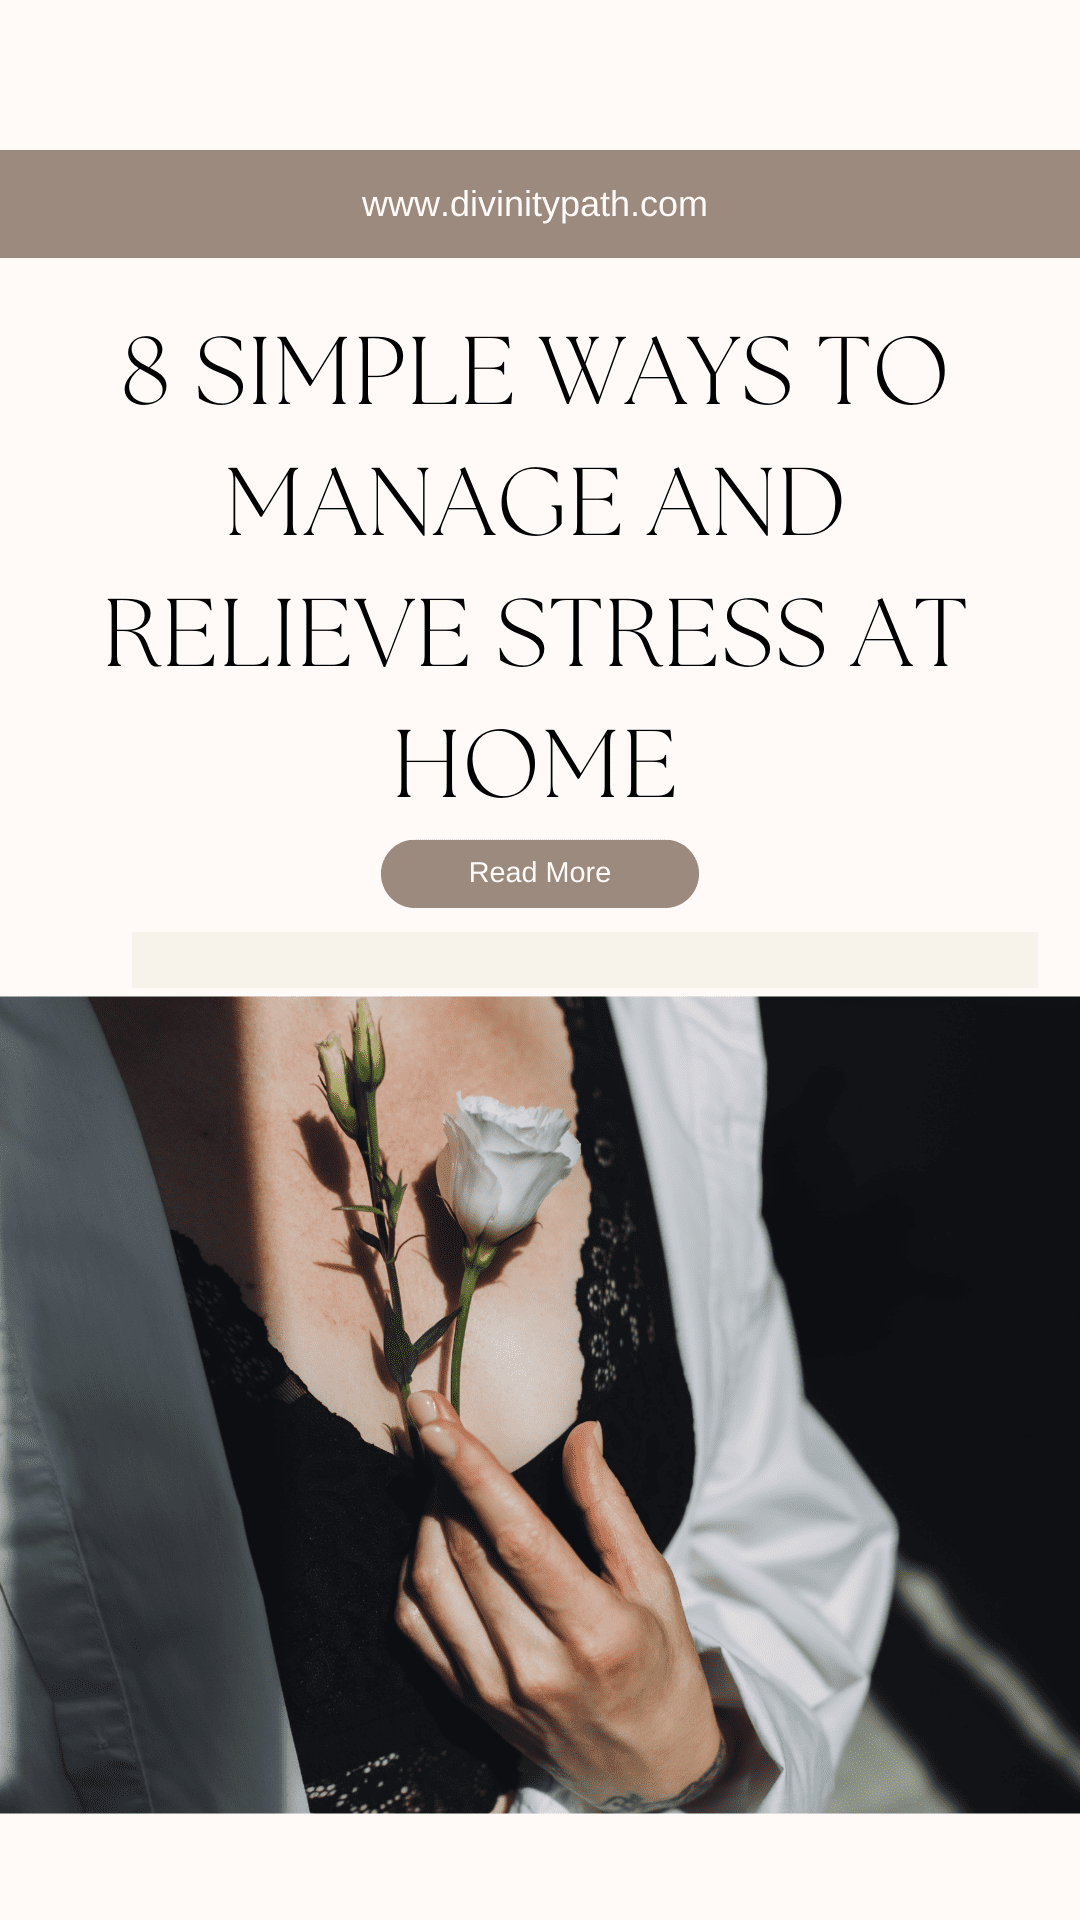 8 Simple Ways To Manage And Relieve Stress At Home